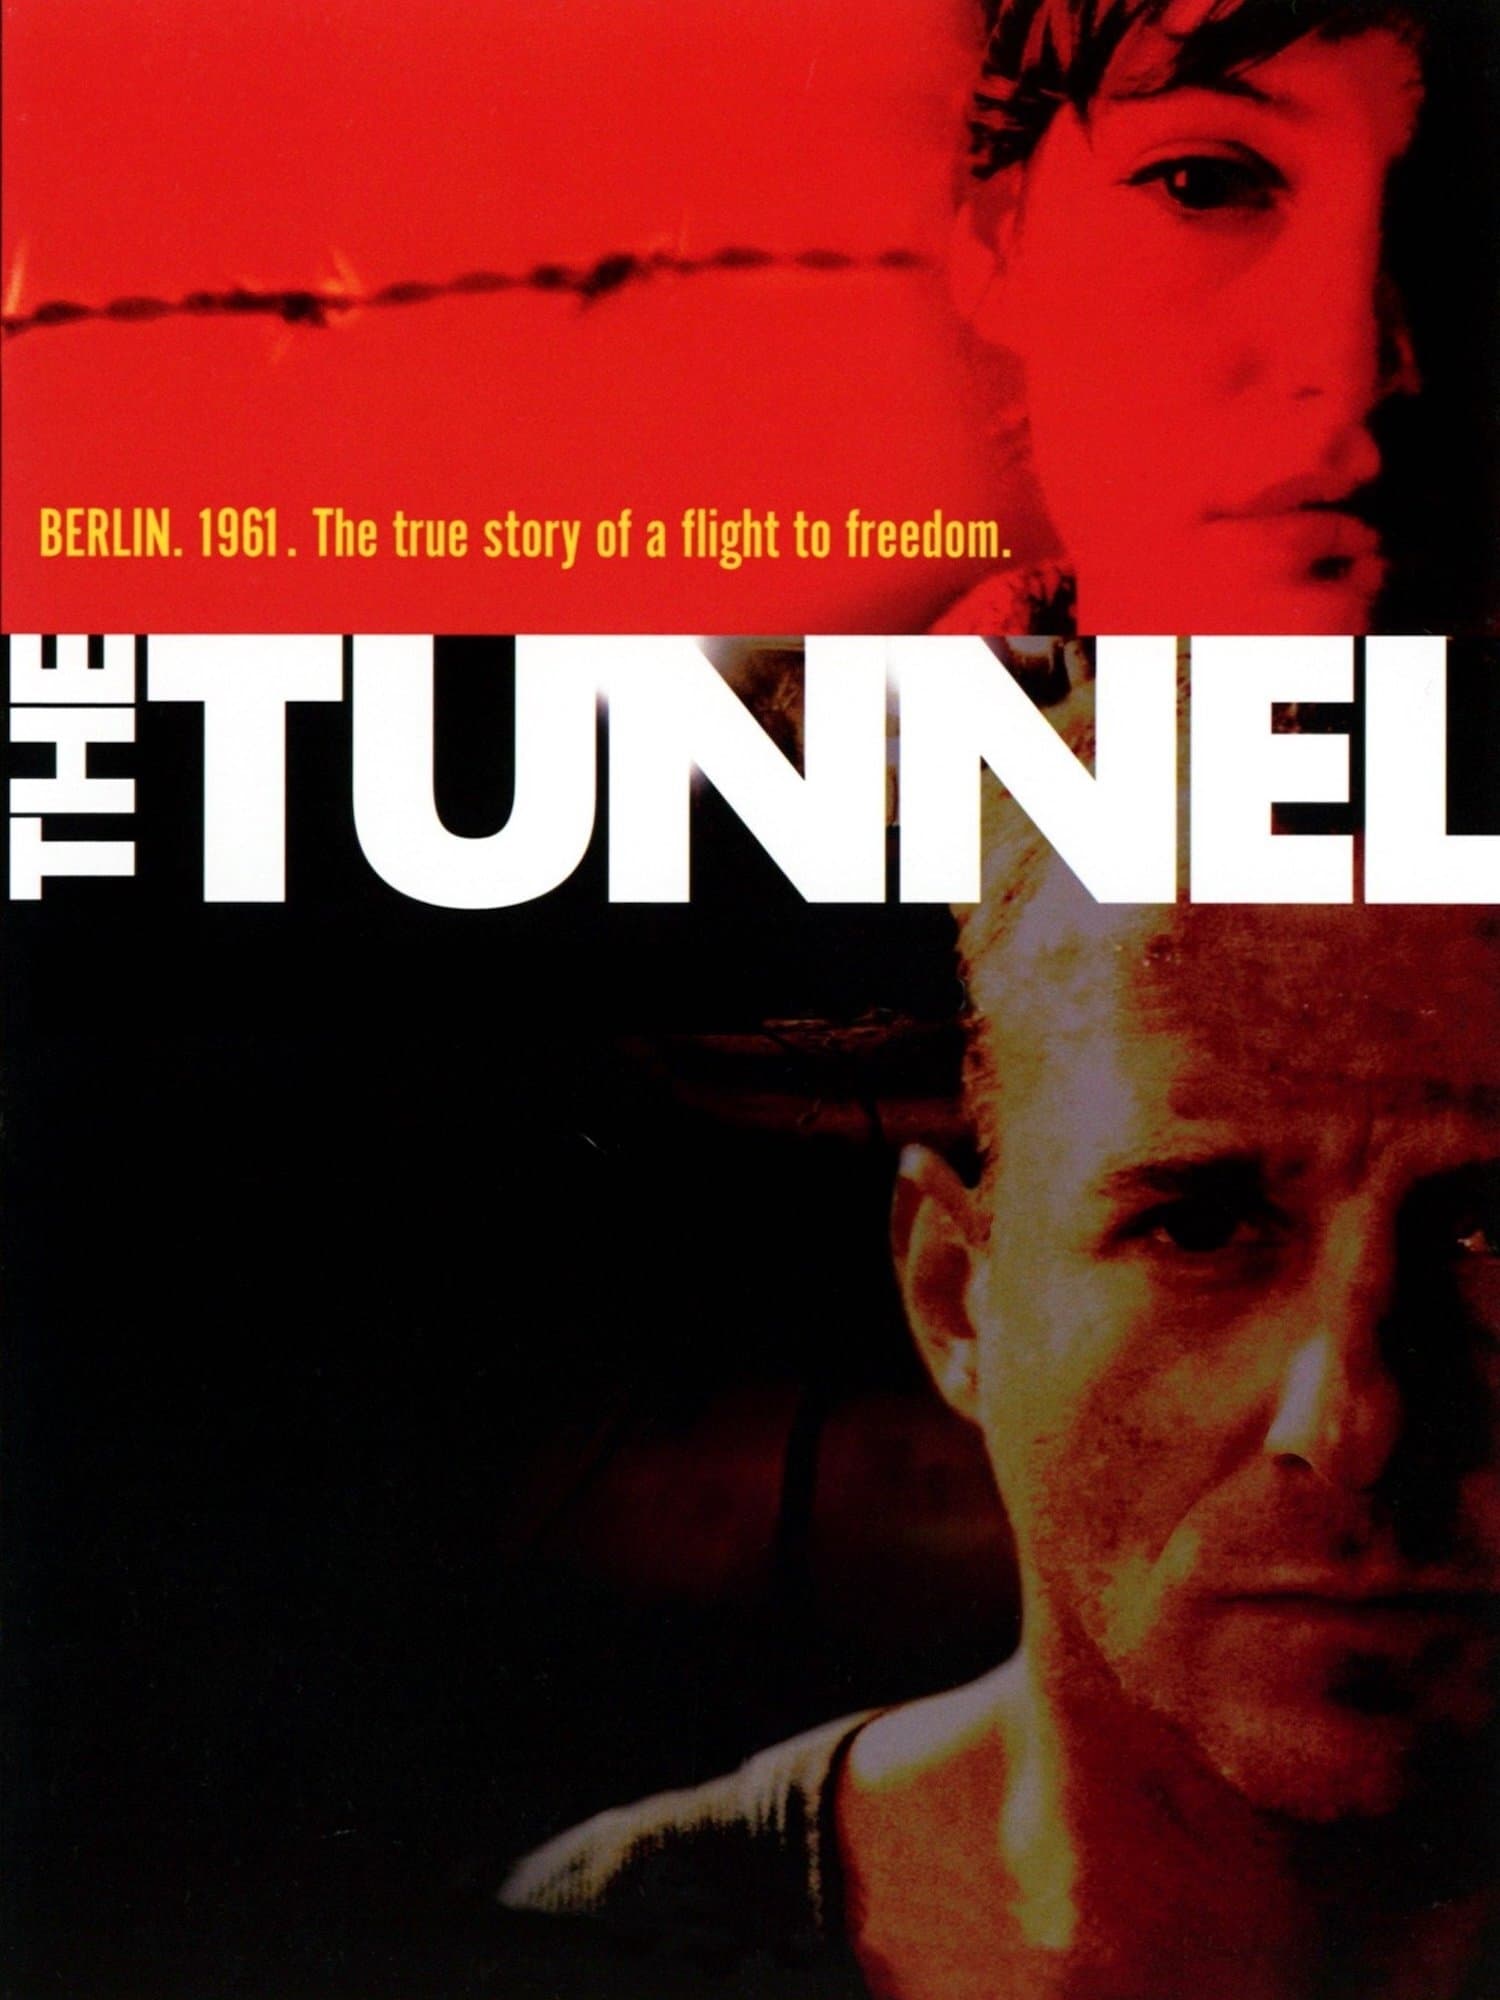 The Tunnel (2001)